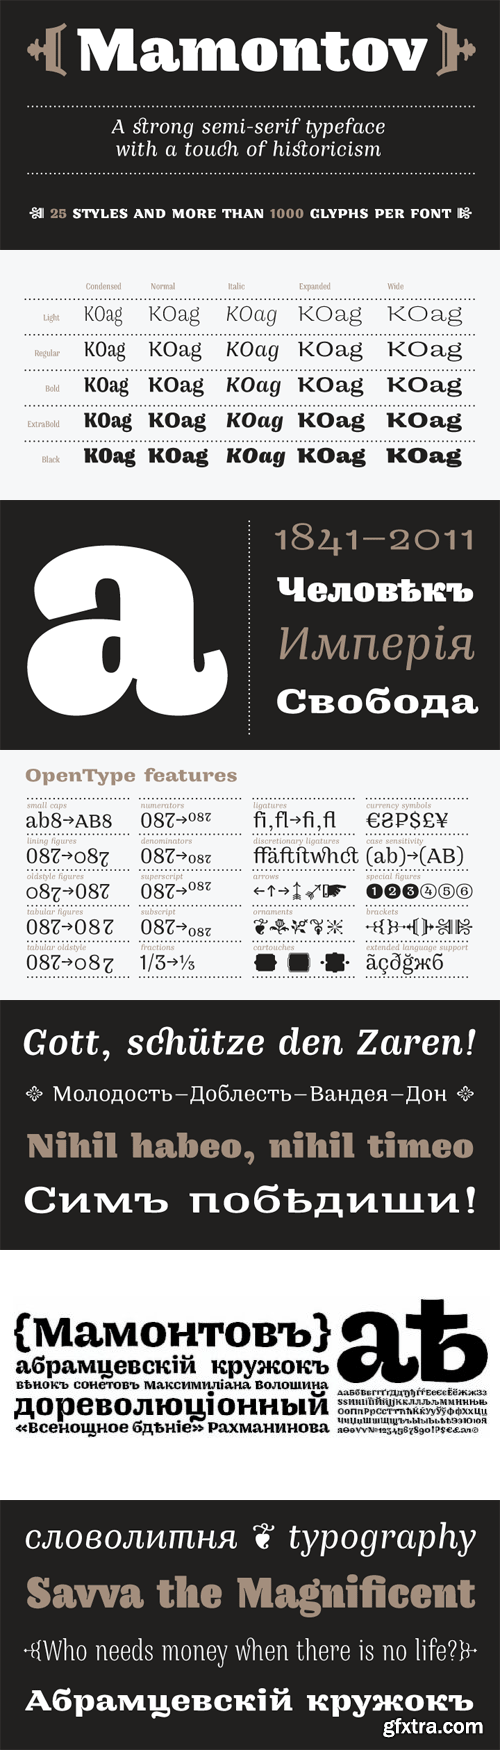 Mamontov Font Family - 25 Fonts for $800